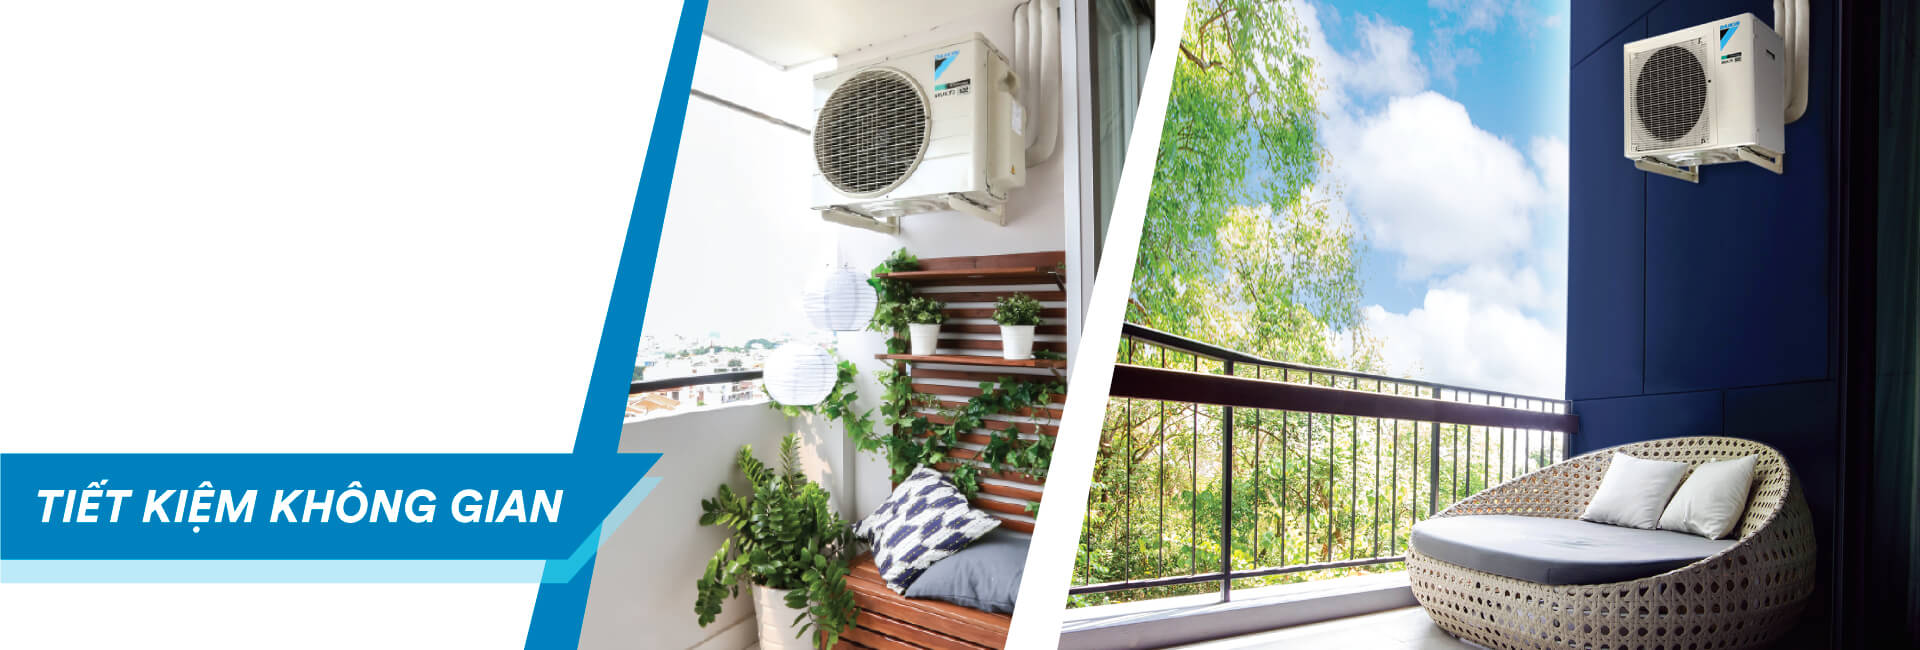 The new generation of air conditioners keeps the balcony comfortable